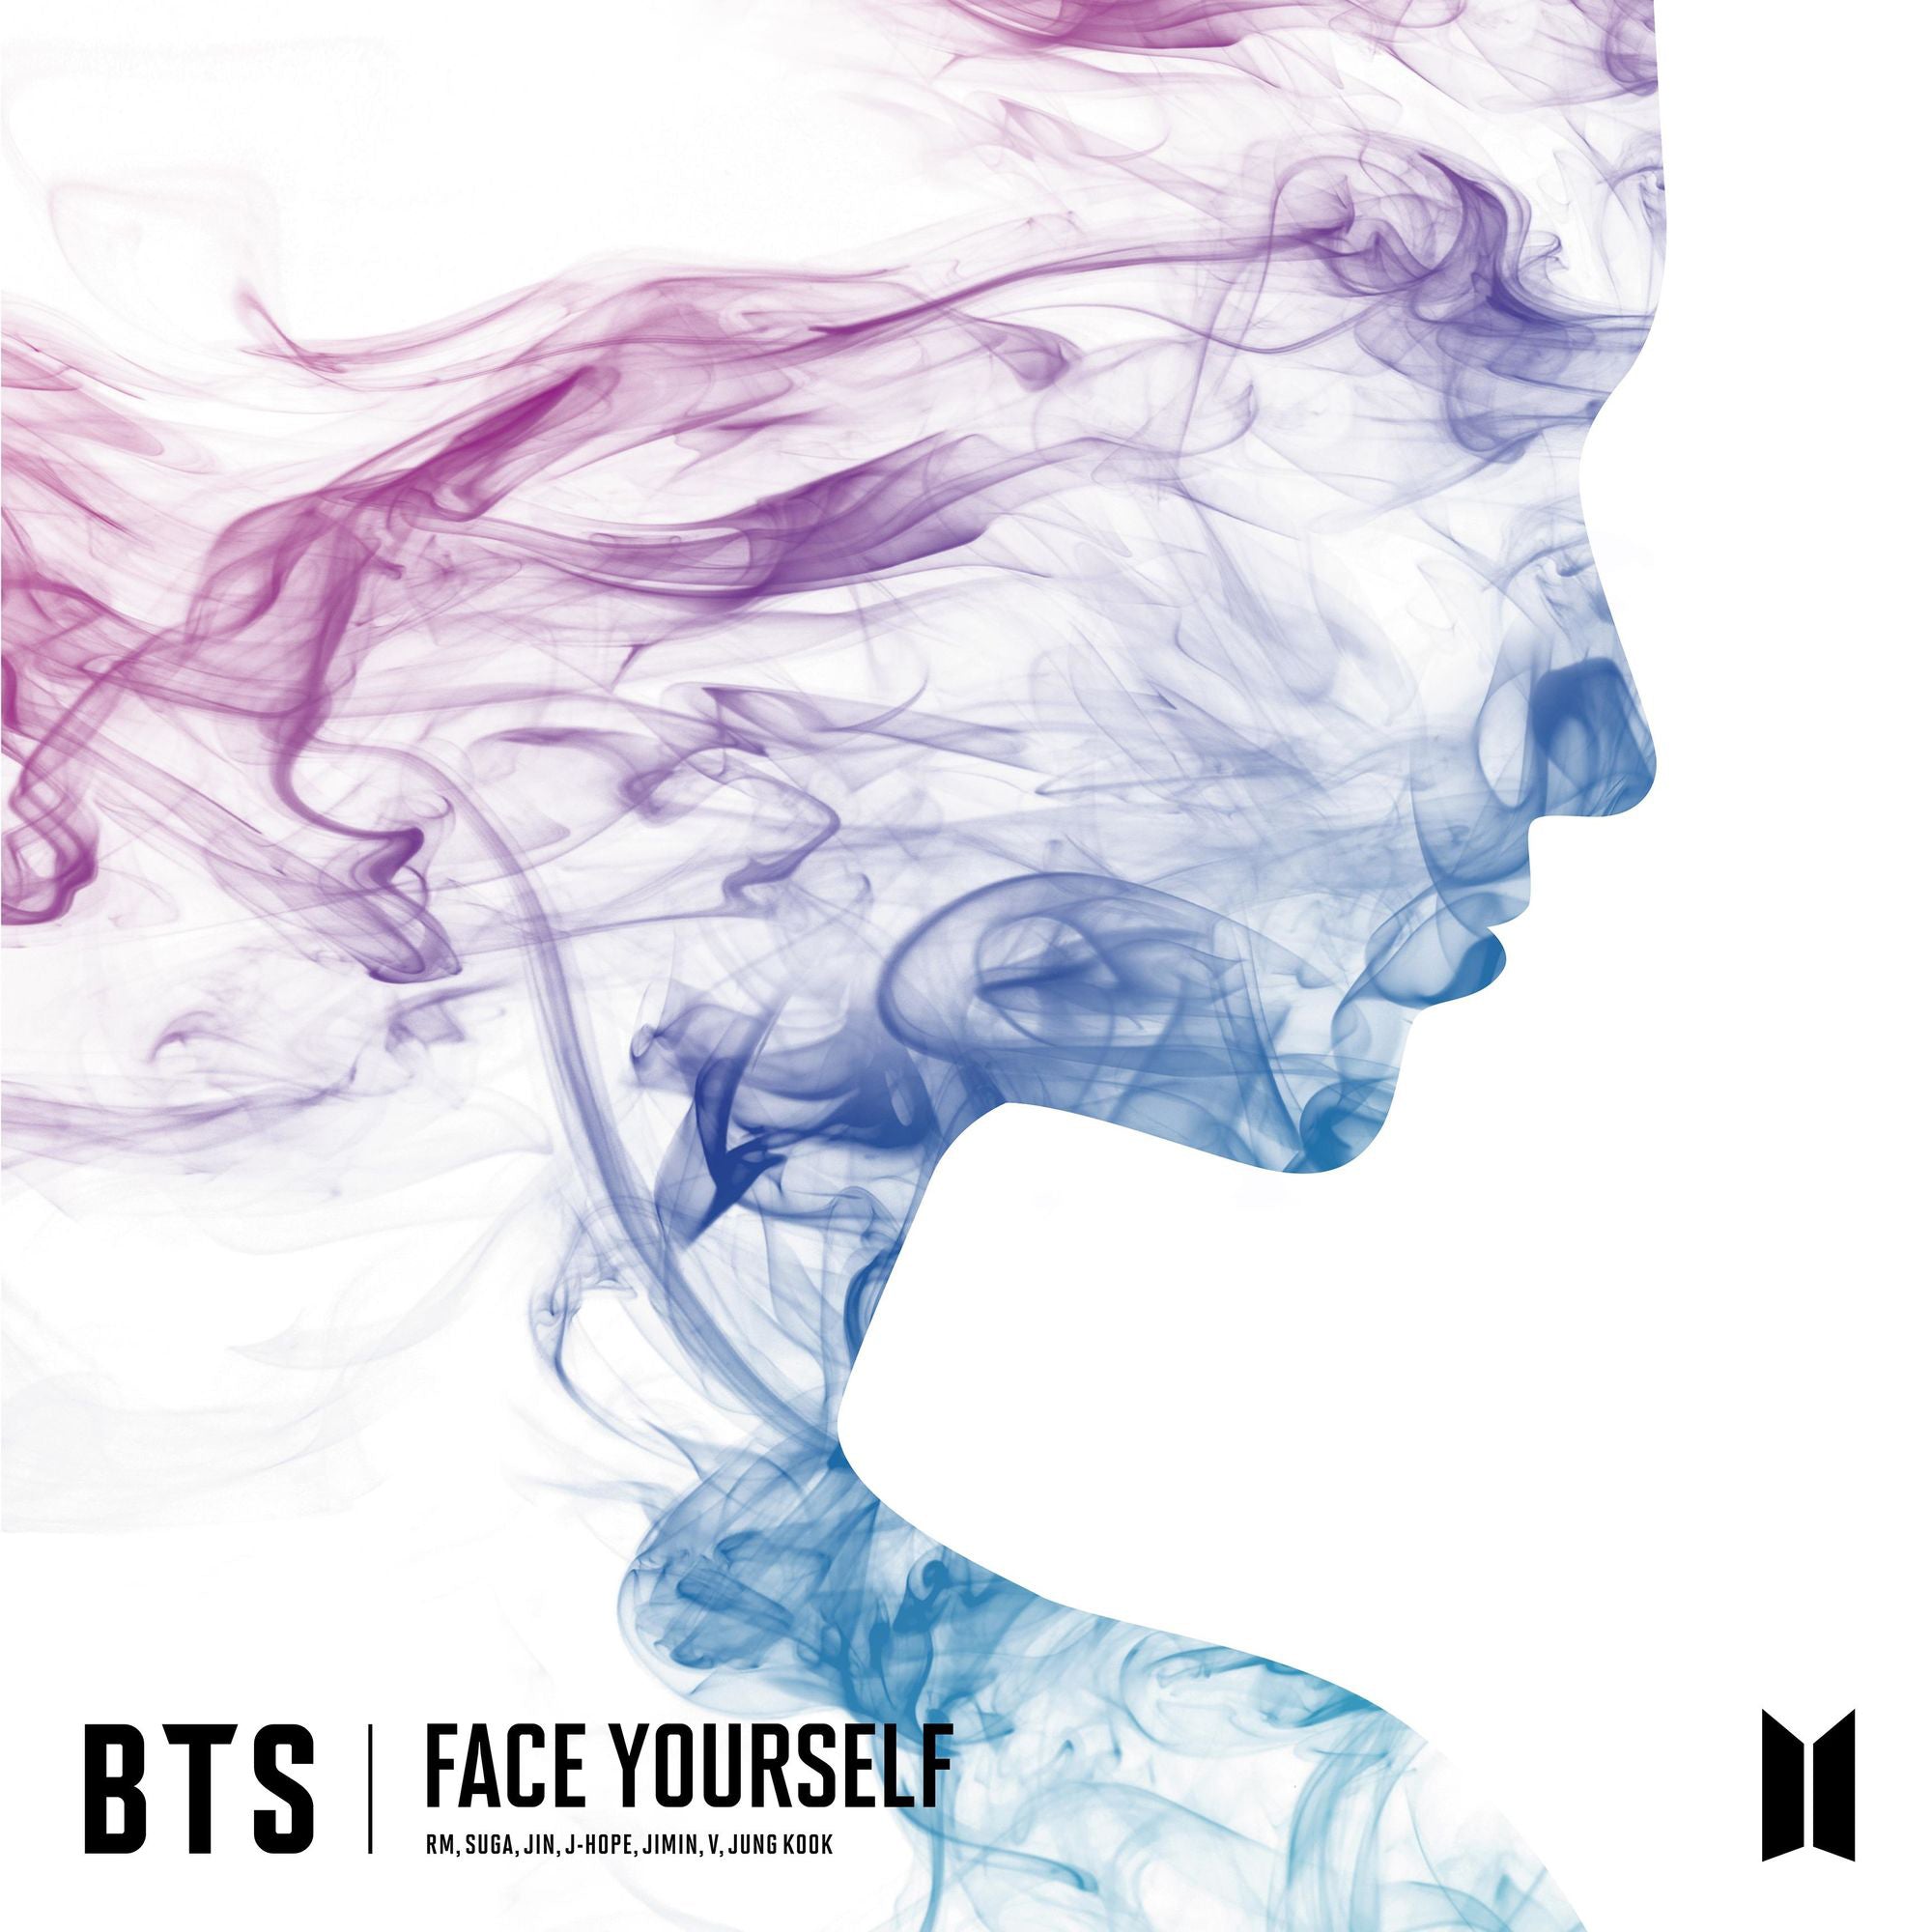 CD BTS - Face yourself